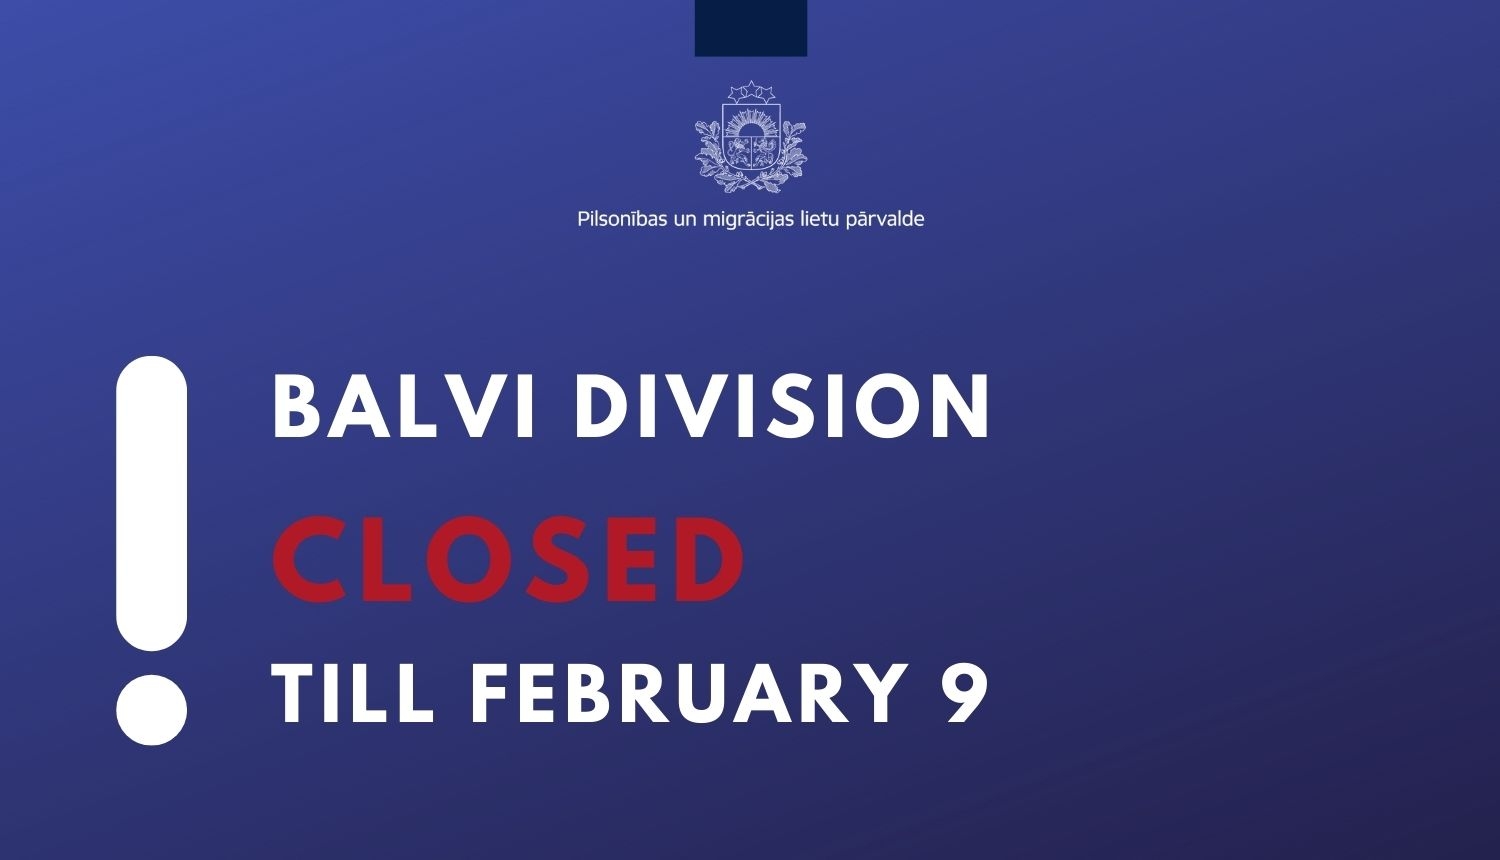 Balvi division is closed till february 9